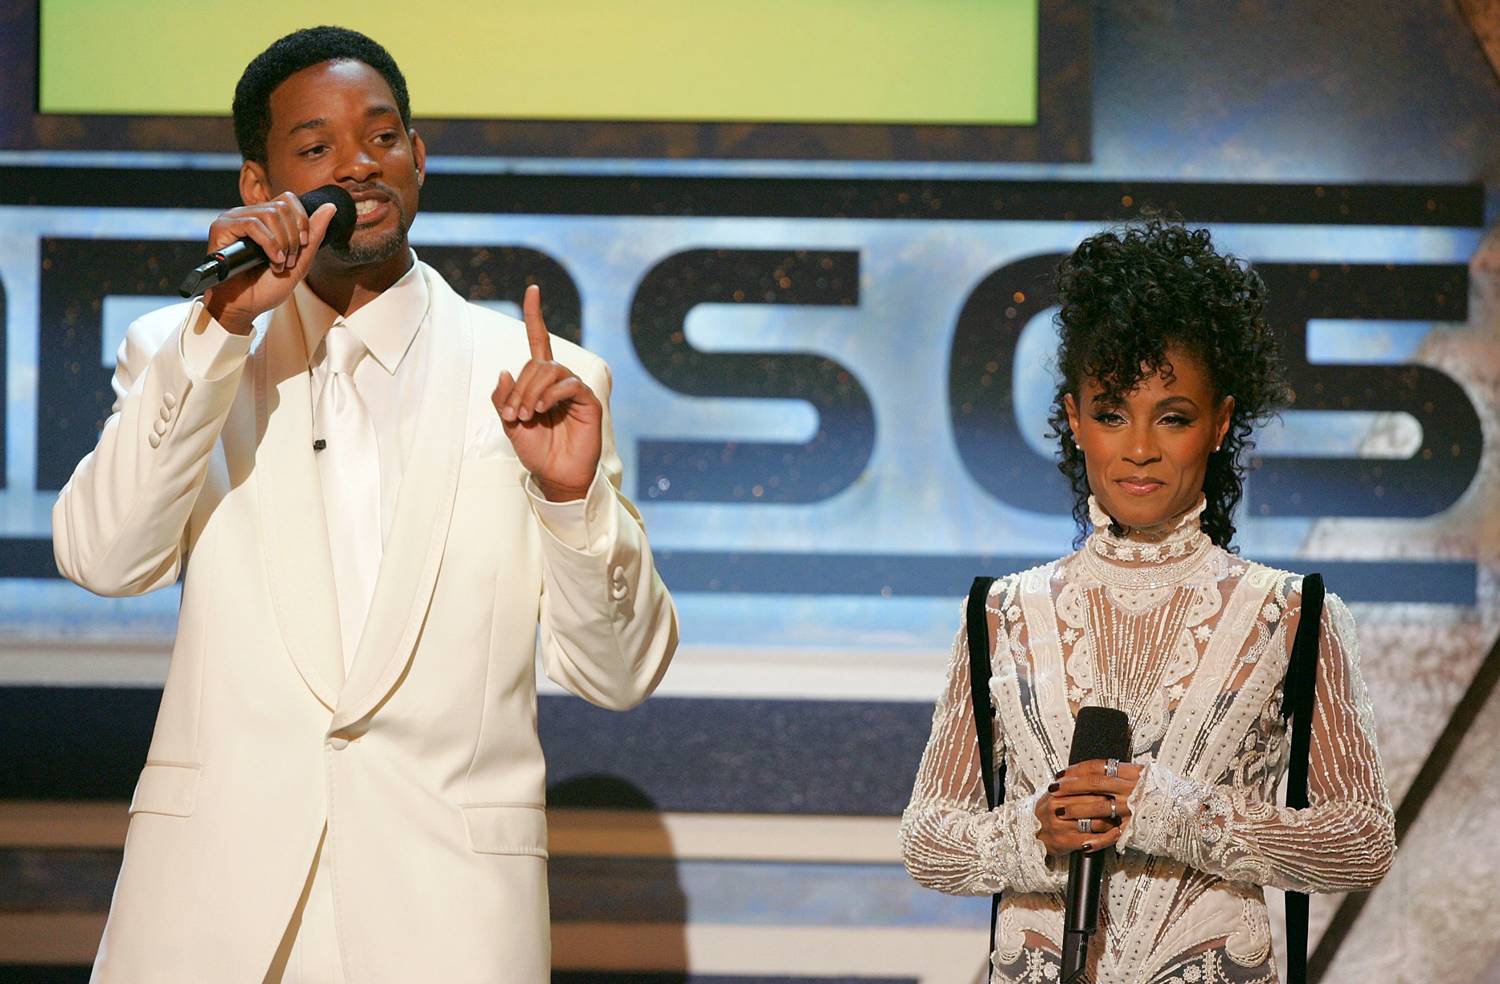 Will Smith and Jada Pinkett-Smith - The mega-star actor shares the stage with his co-host and wife, who is nominated for a Best Collaboration award&nbsp;during the 5th Annual BET Awards at the Kodak Theatre on June 28, 2005, in Hollywood, California.(Photo: Kevin Winter/Getty Images)